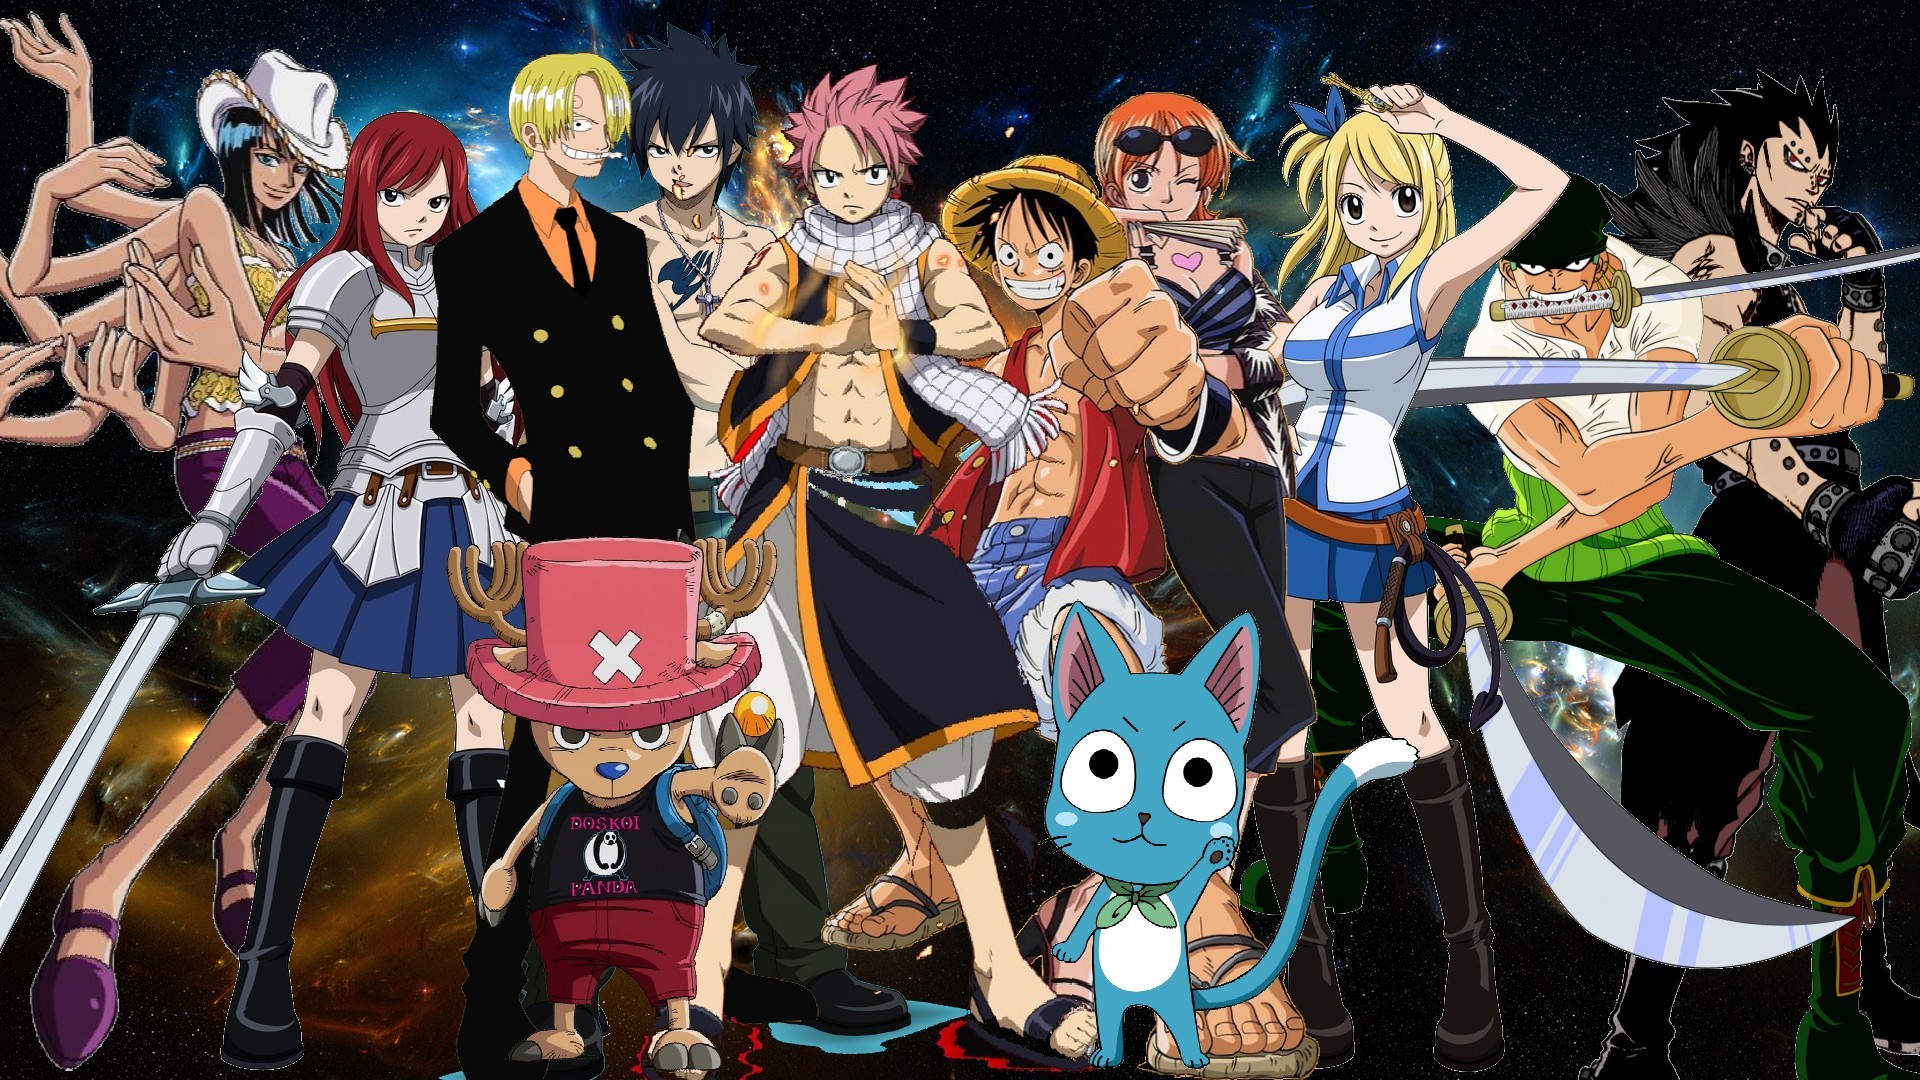 Download Fairy Tail Wallpaper Windows Manga pictures in high